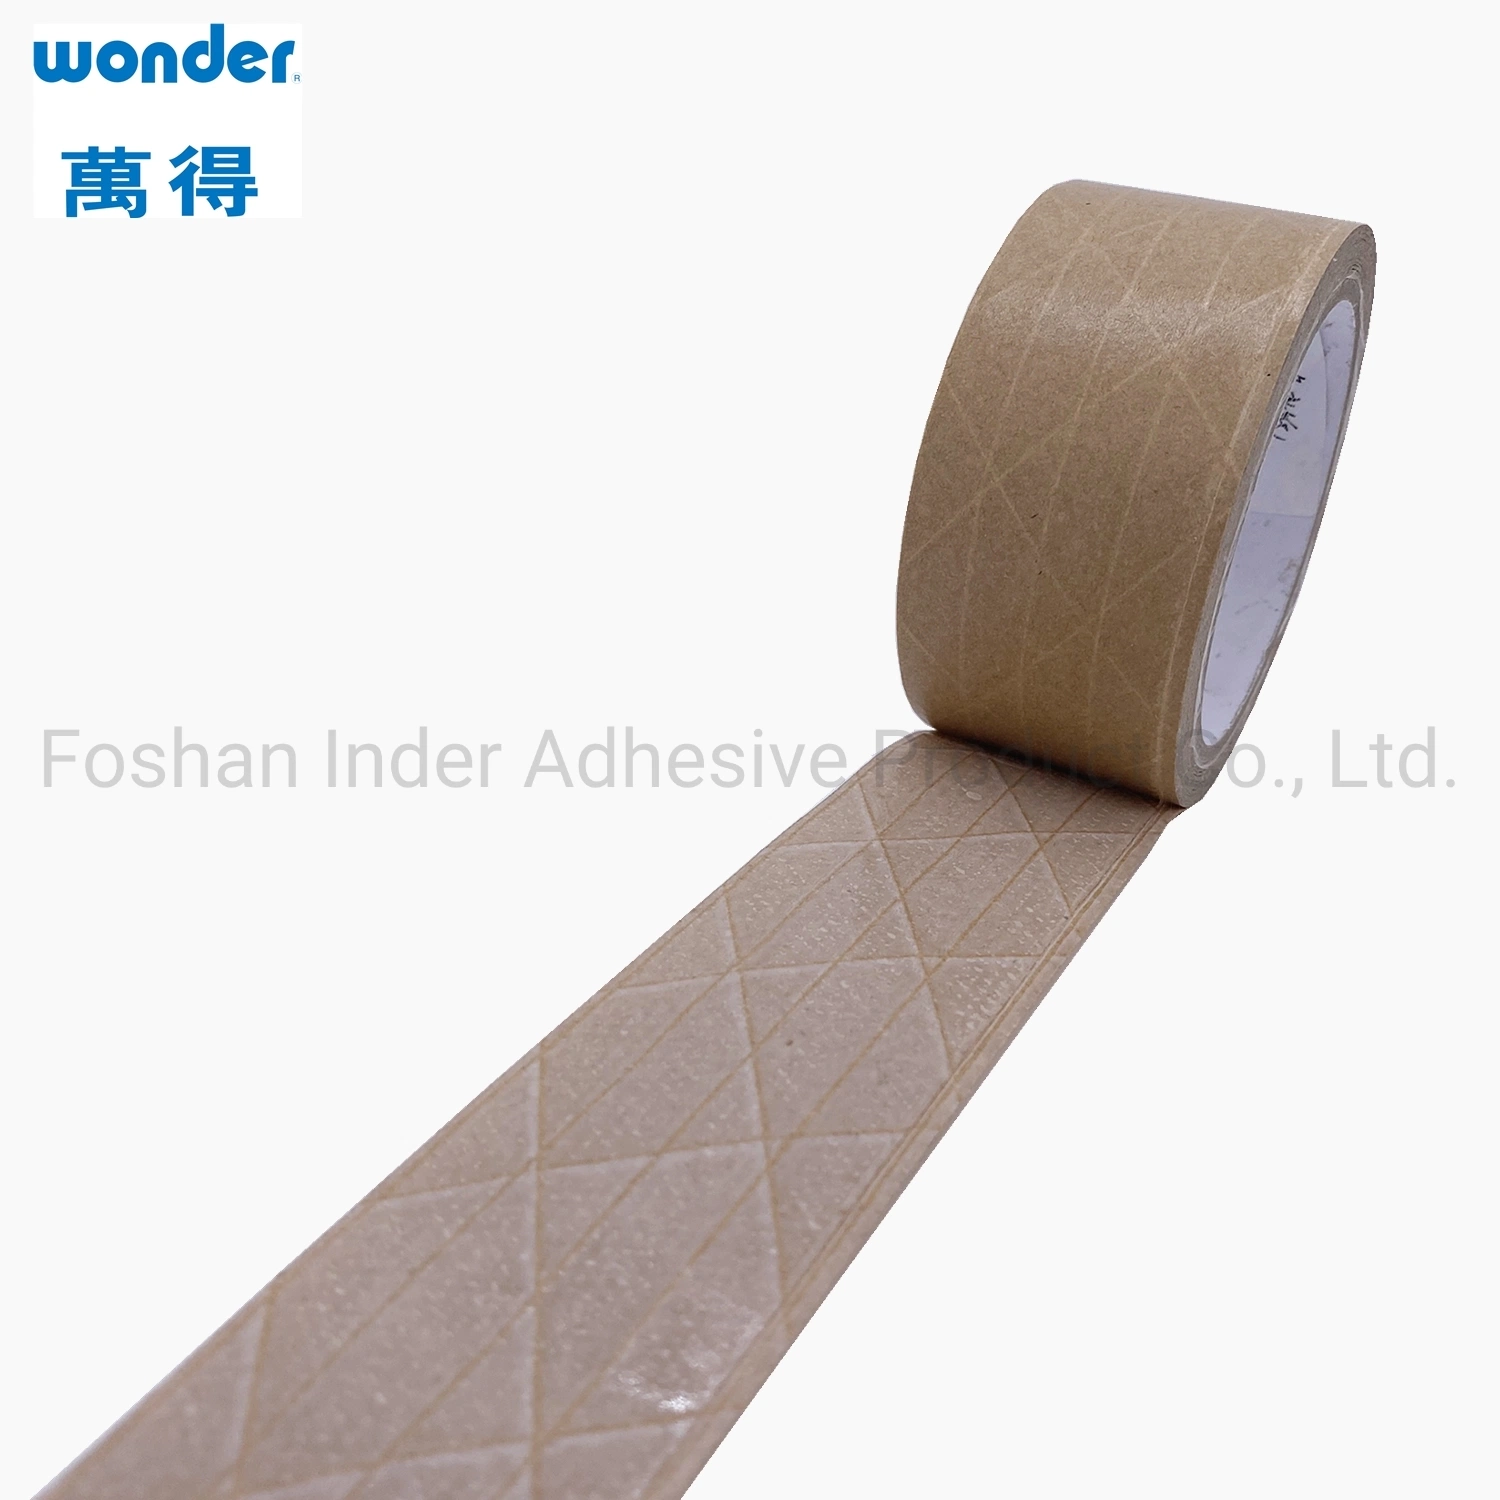 Wonder Brand Writable Self Adhesive Brown Kraft Paper Tape Coated with Rubber Glue